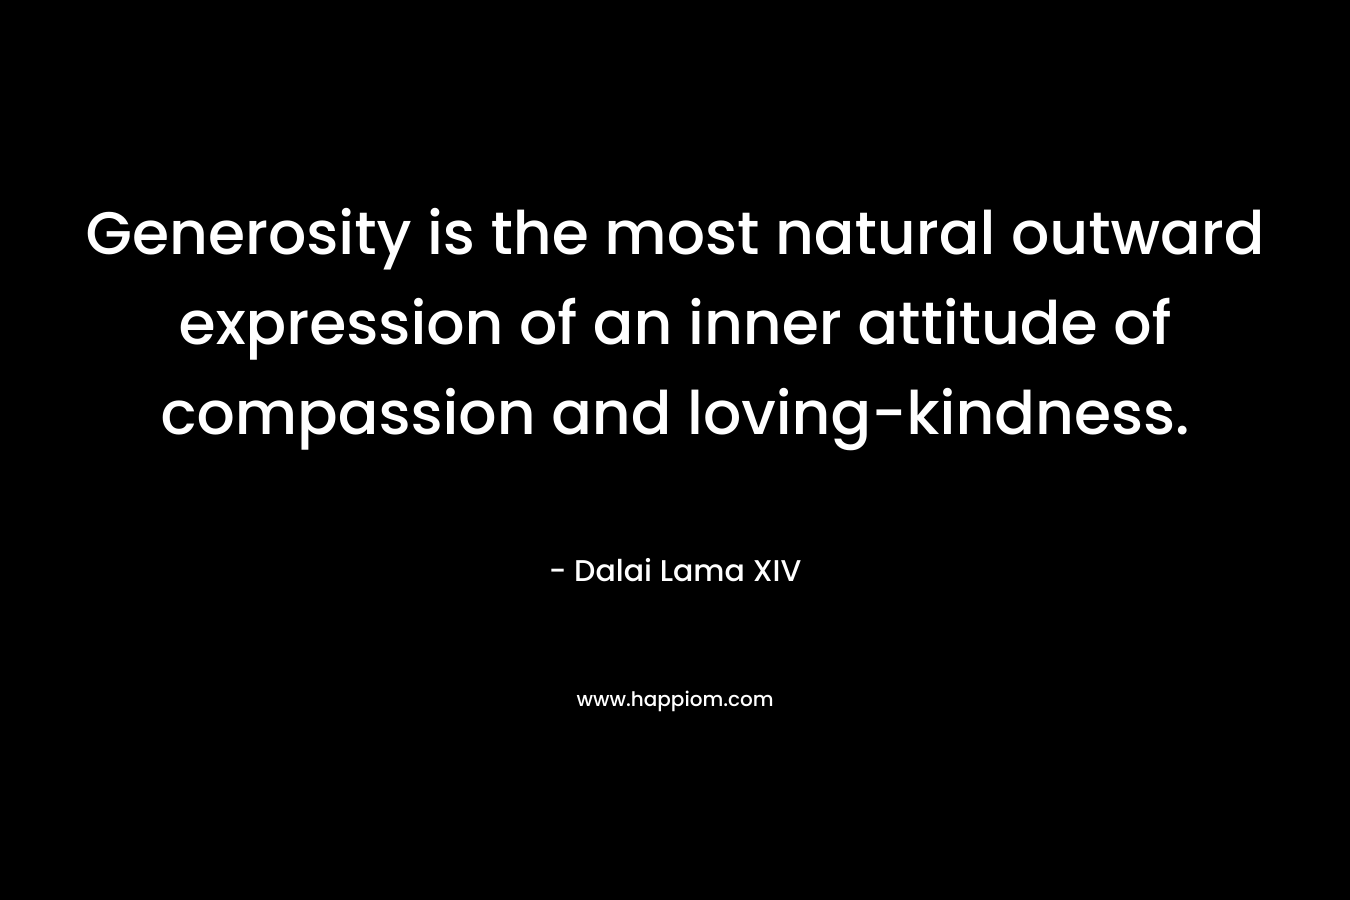 Generosity is the most natural outward expression of an inner attitude of compassion and loving-kindness.